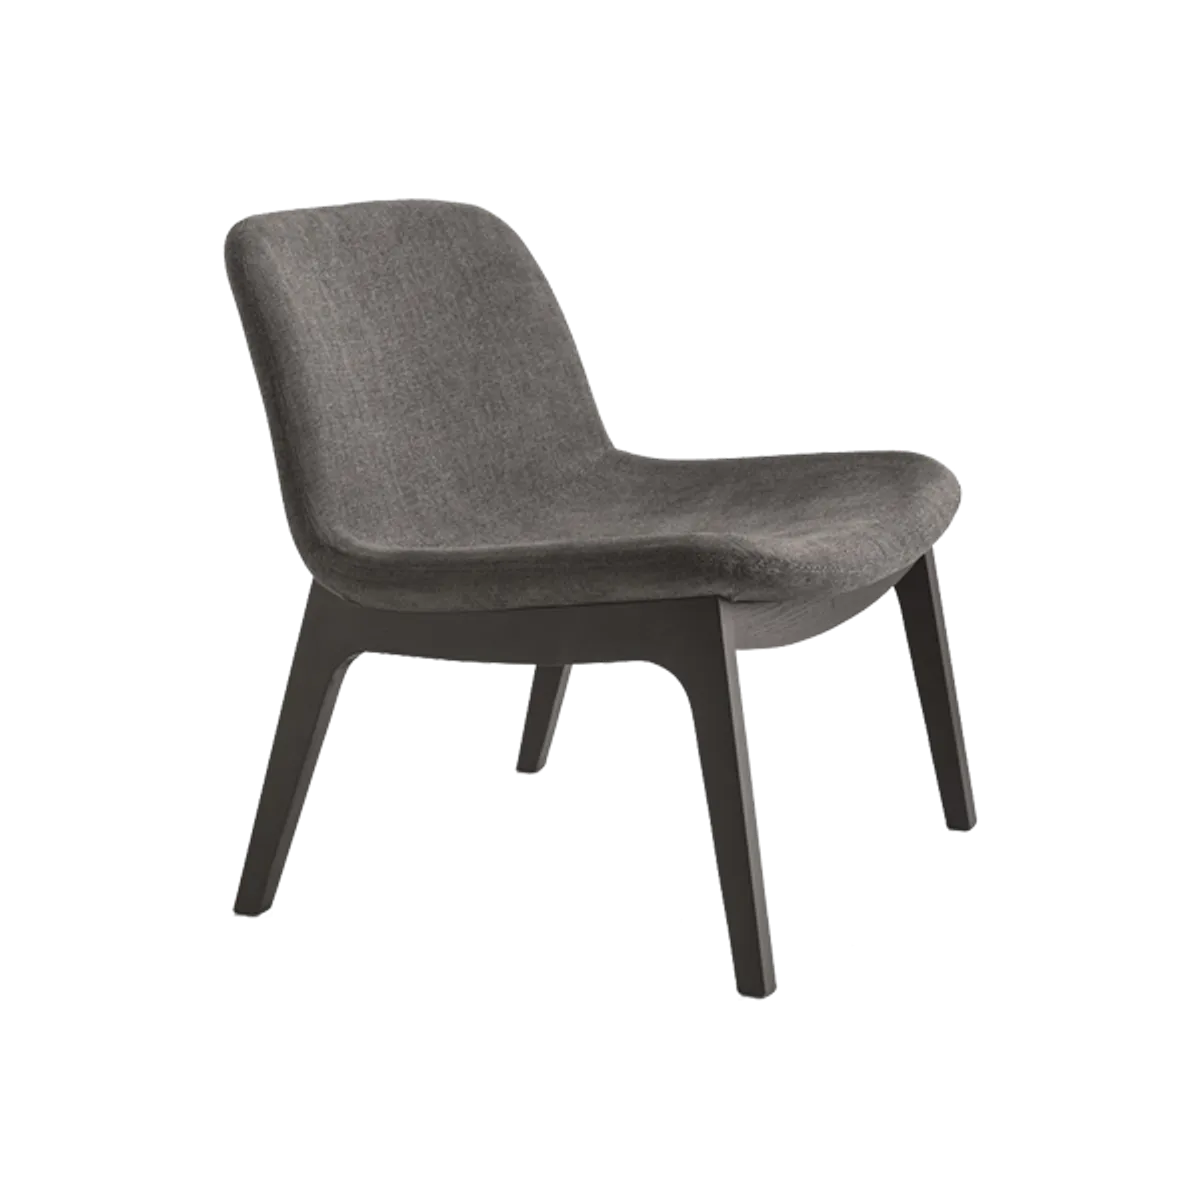 Web College Lounge Chair Wood And Grey Inside Out Contracts